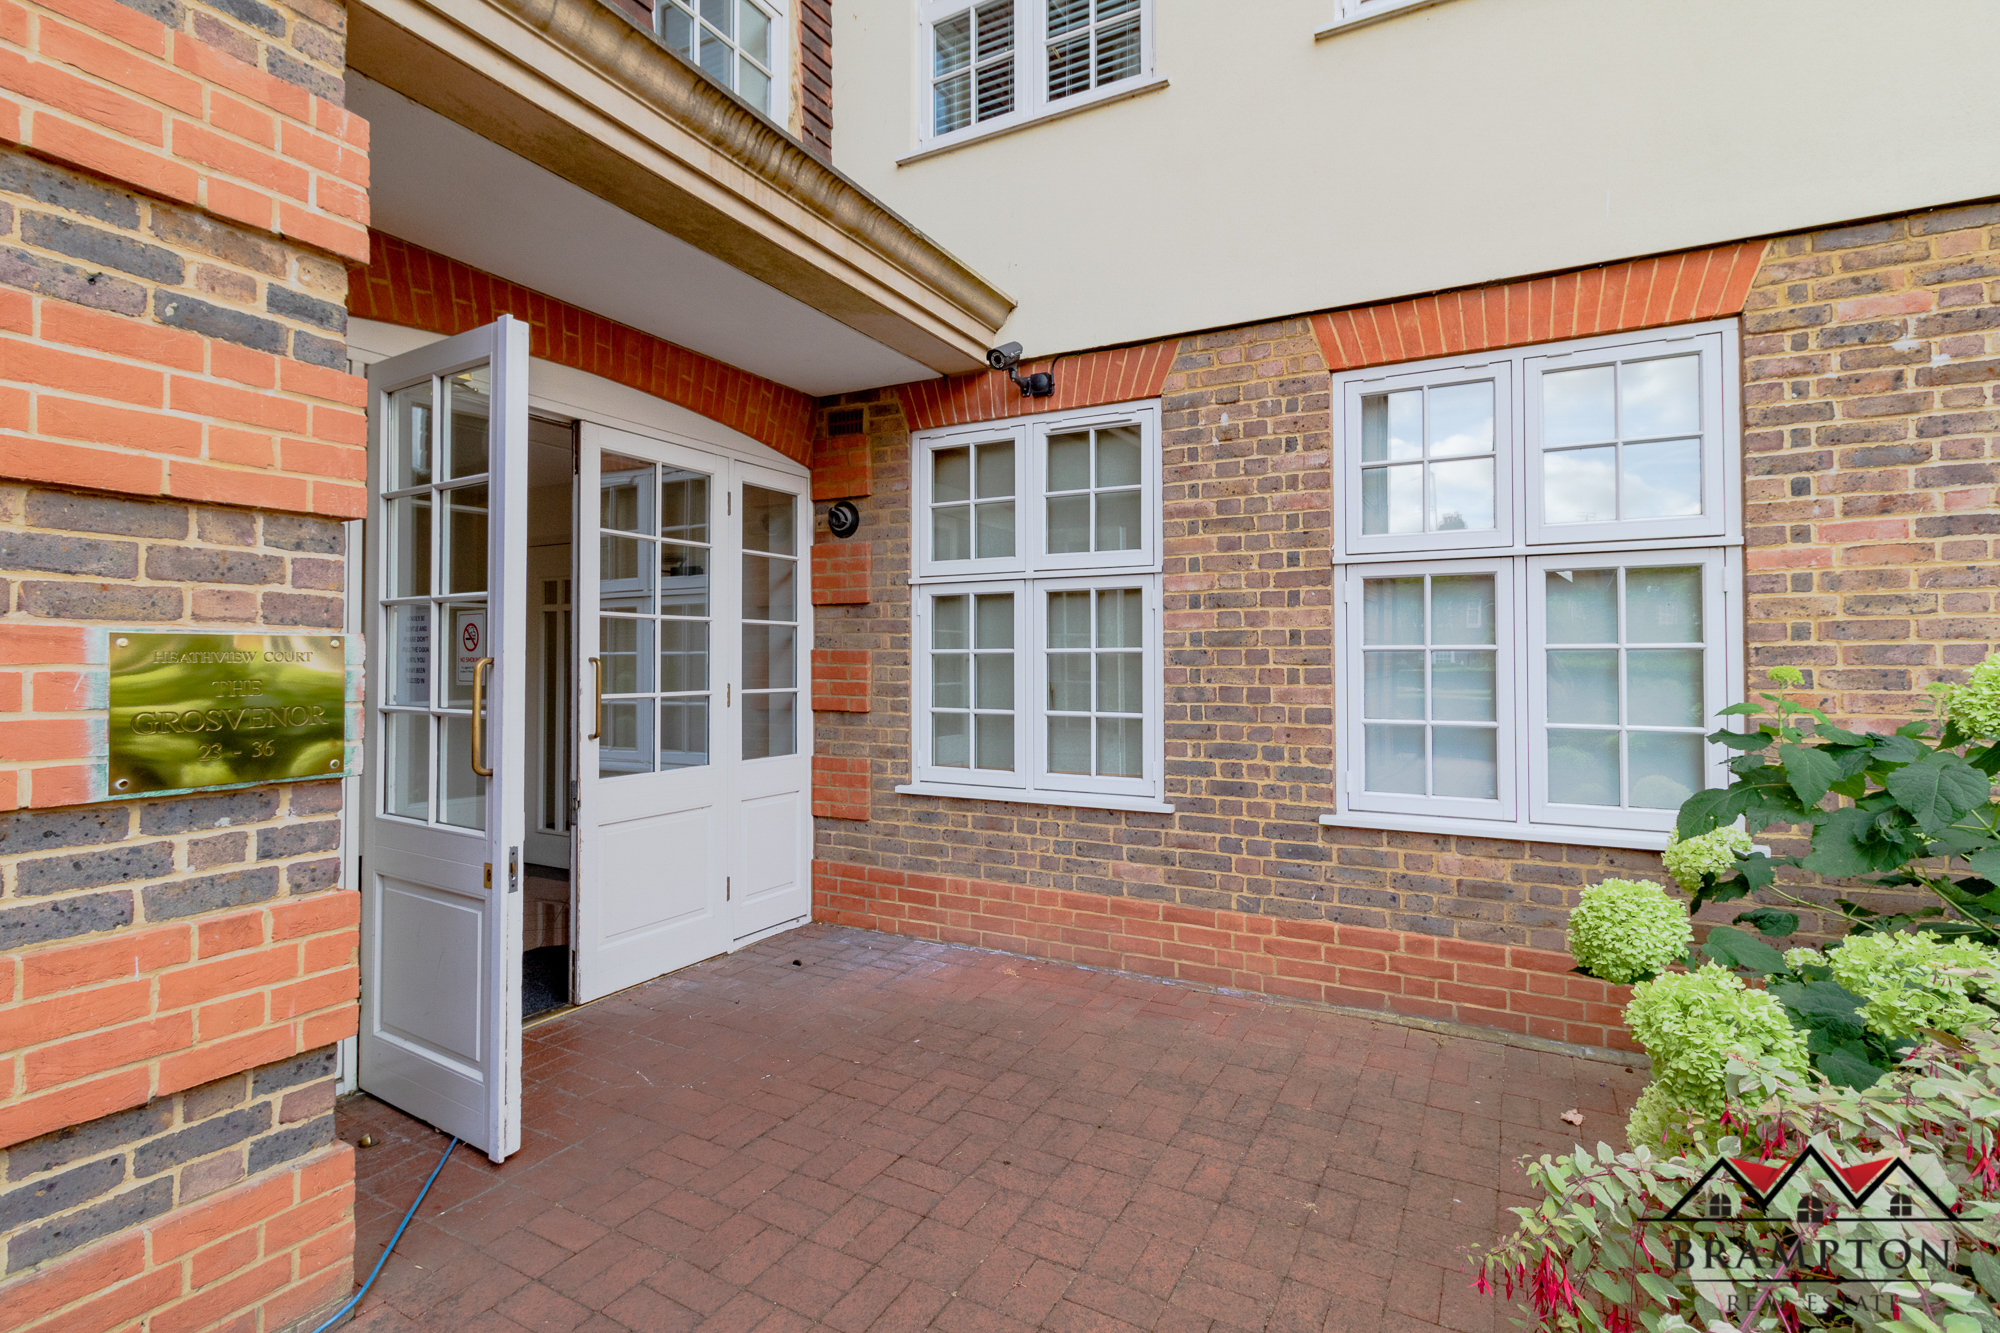 2 bed Flat for rent in London. From Brampton Real Estate